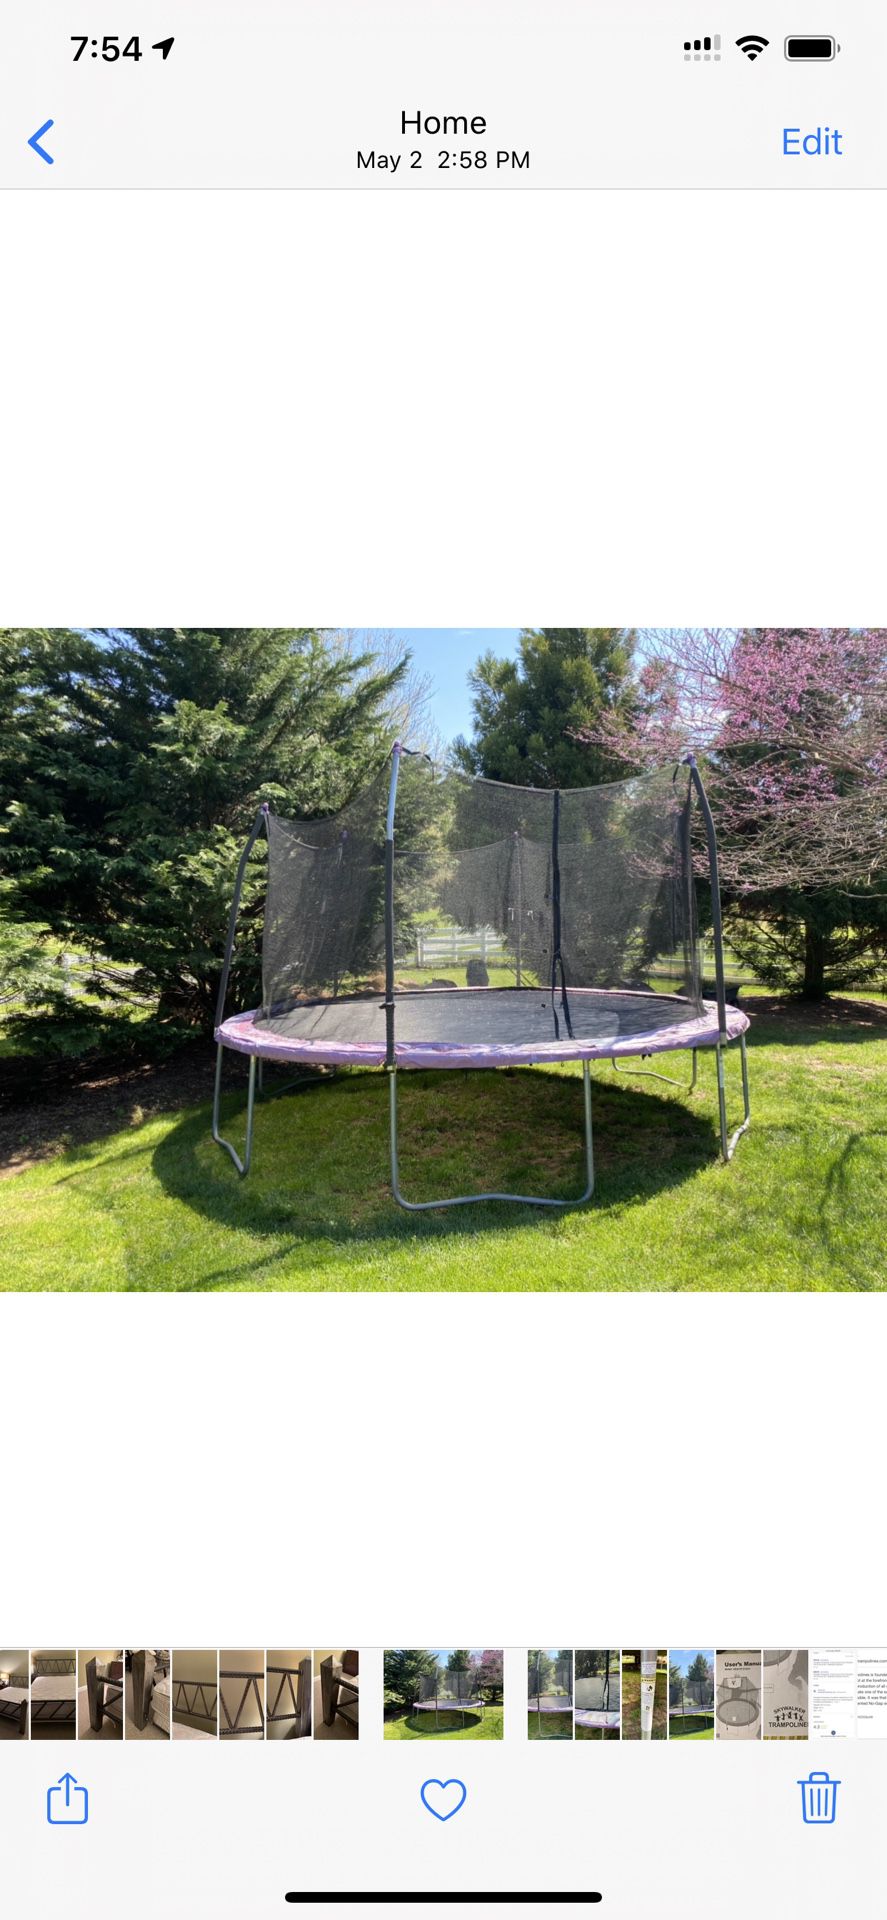 Sold-will mark as sold once it’s picked up today 15’ Trampoline